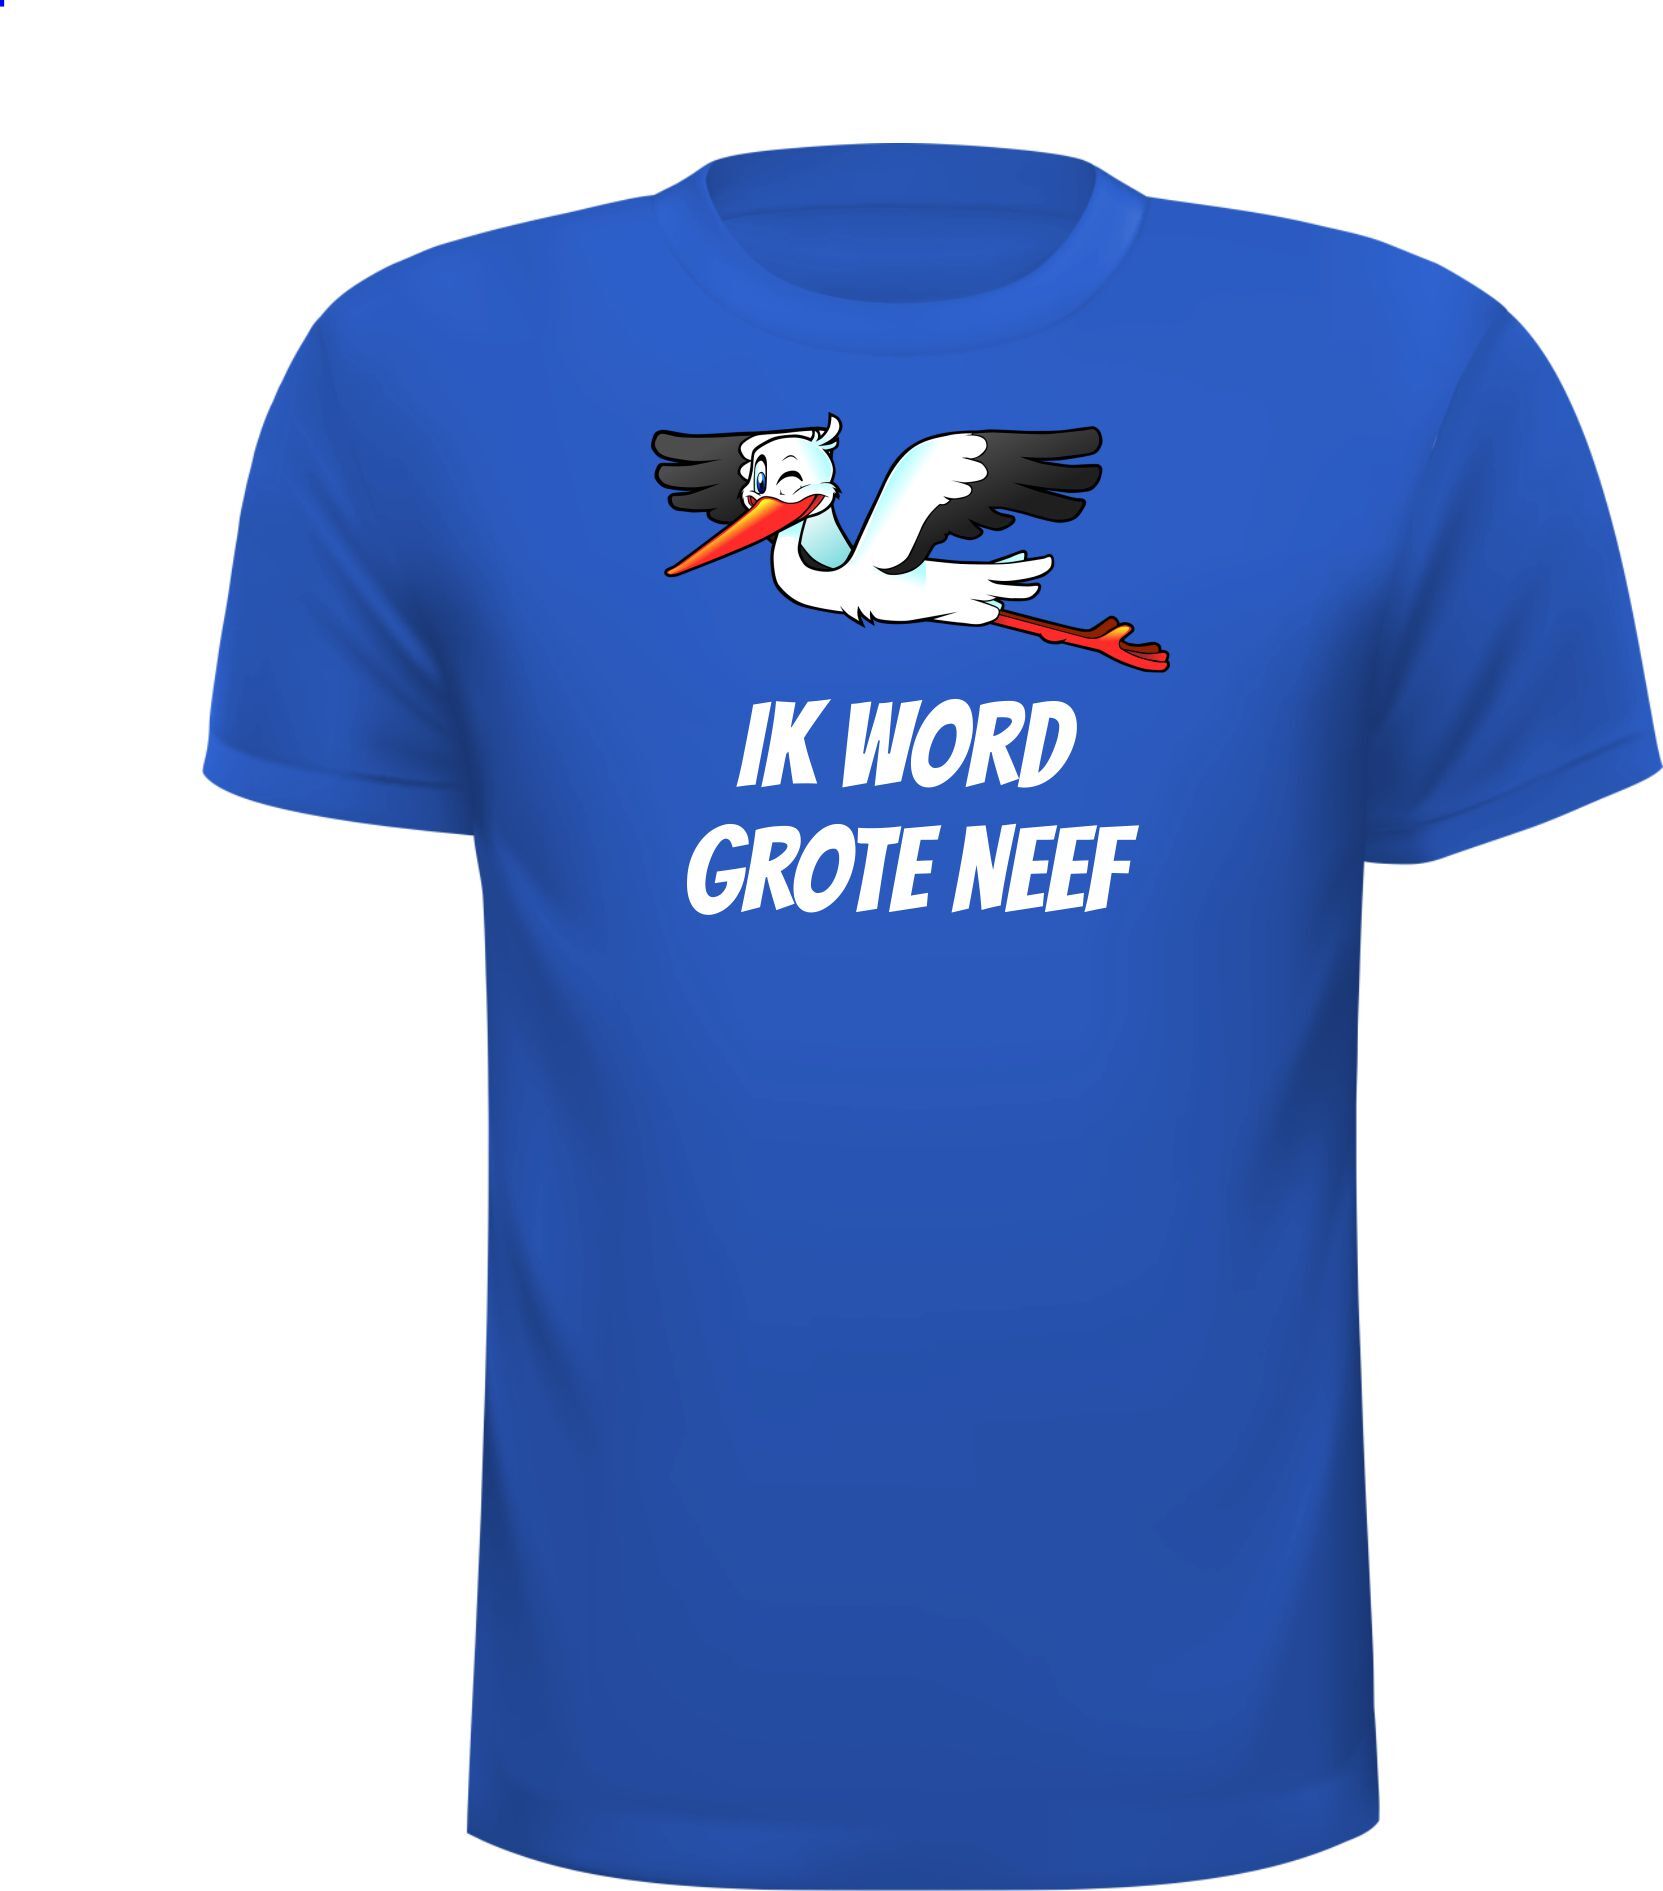 Grote neef T-shirt